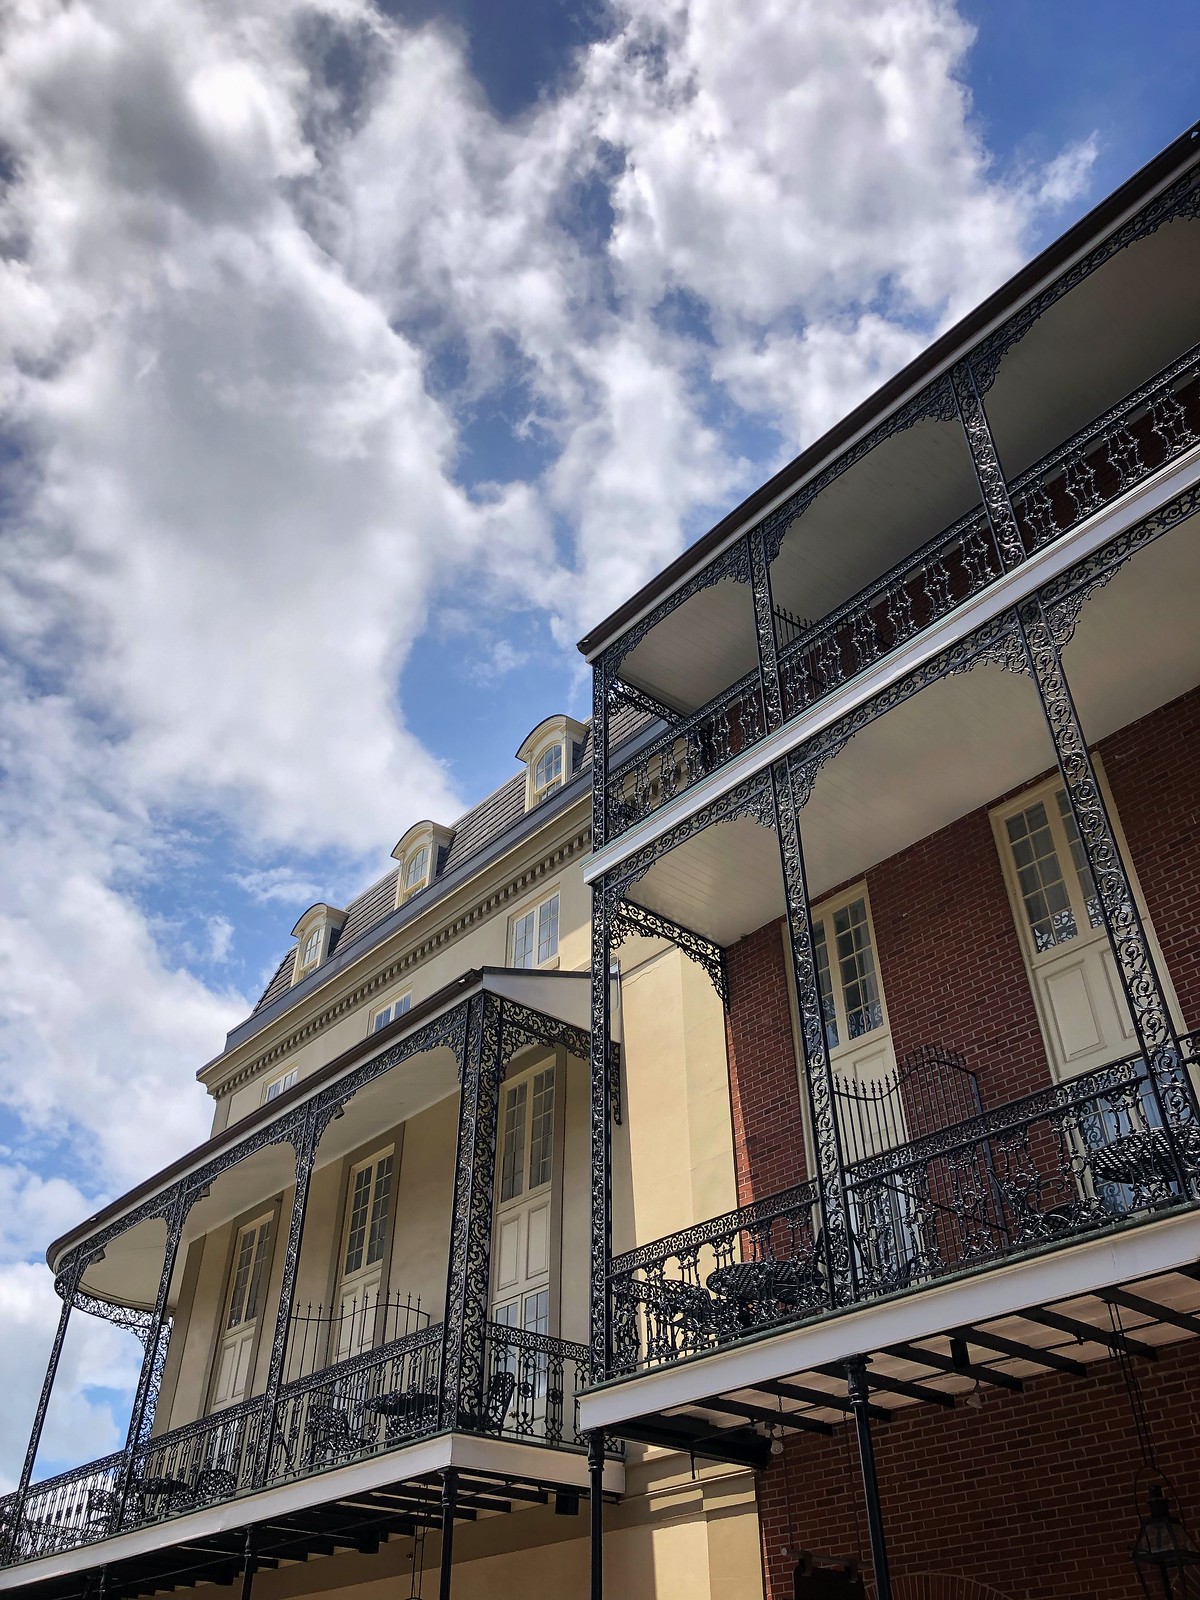 French Quarter | How to Spend 48 Hours in New Orleans in the Summer | New Orleans Travel Guide | What to do in New Orleans | 2 Days in New Orleans | Best Things to do in New Orleans | First Timer’s Guide to NOLA | NOLA Travel Guide | 2 Day Itinerary for New Orleans